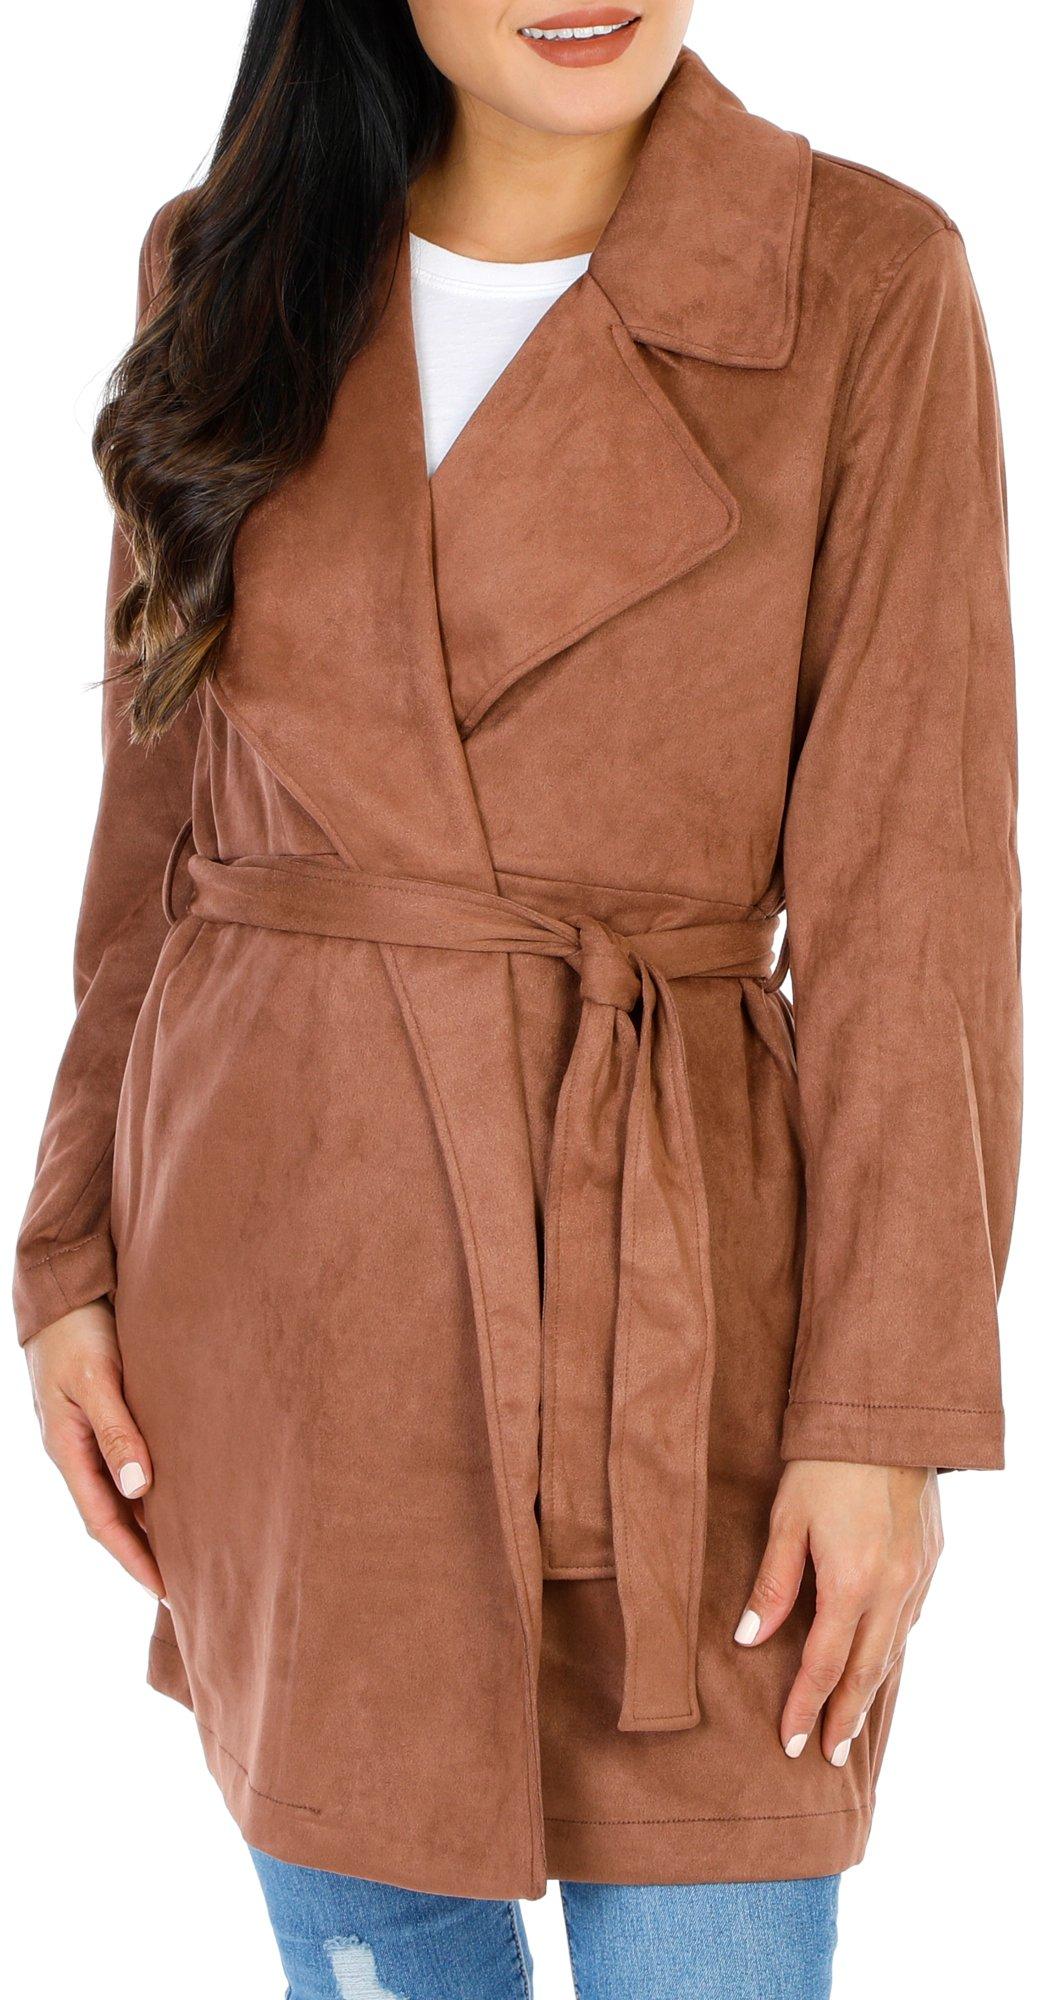 Women's Faux Suede Trench Coat